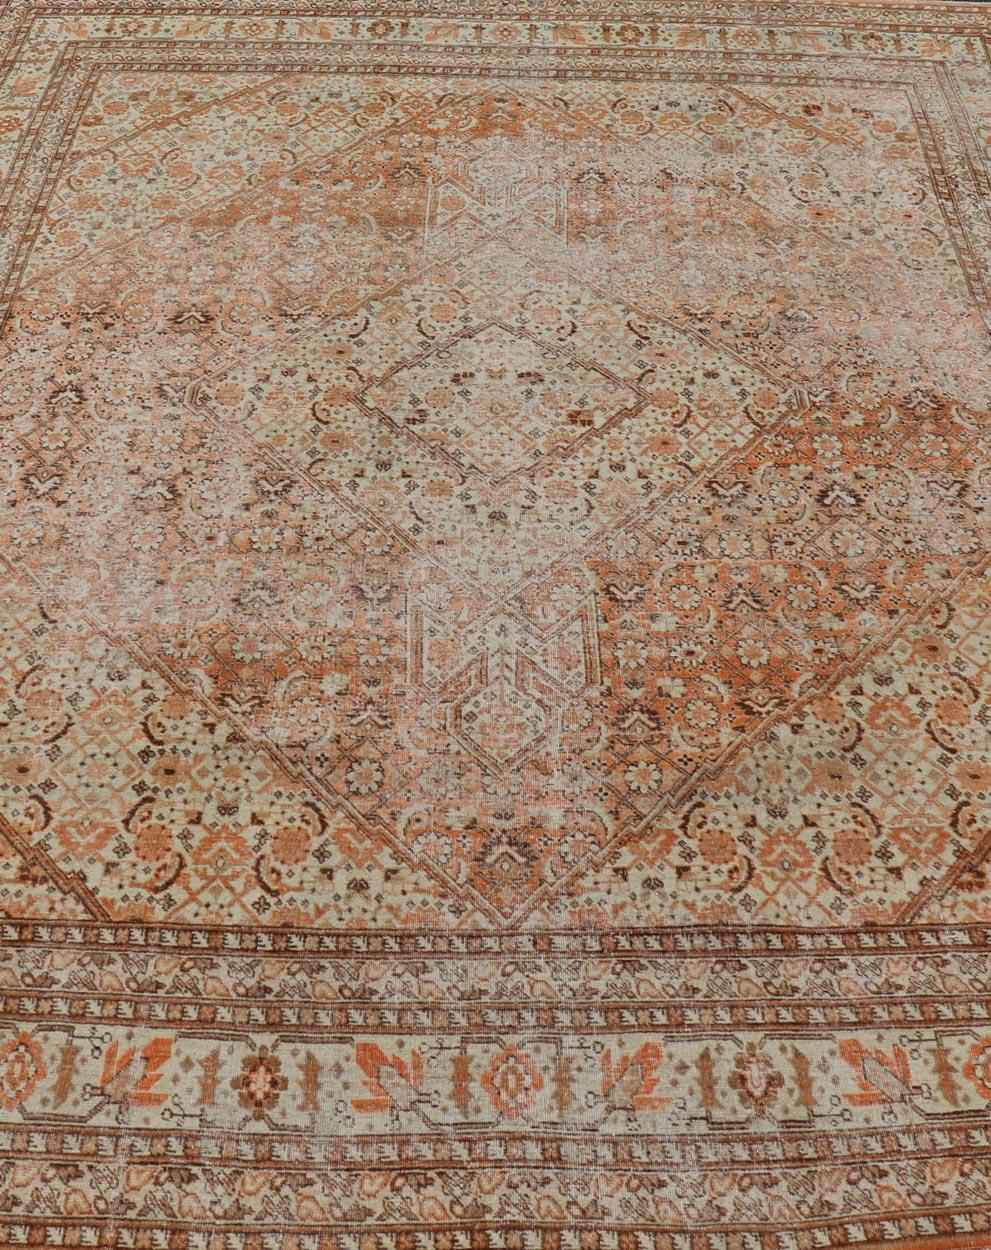 20th Century Antique Persian Tabriz with All-Over Medallion Design in Orange and Browns For Sale